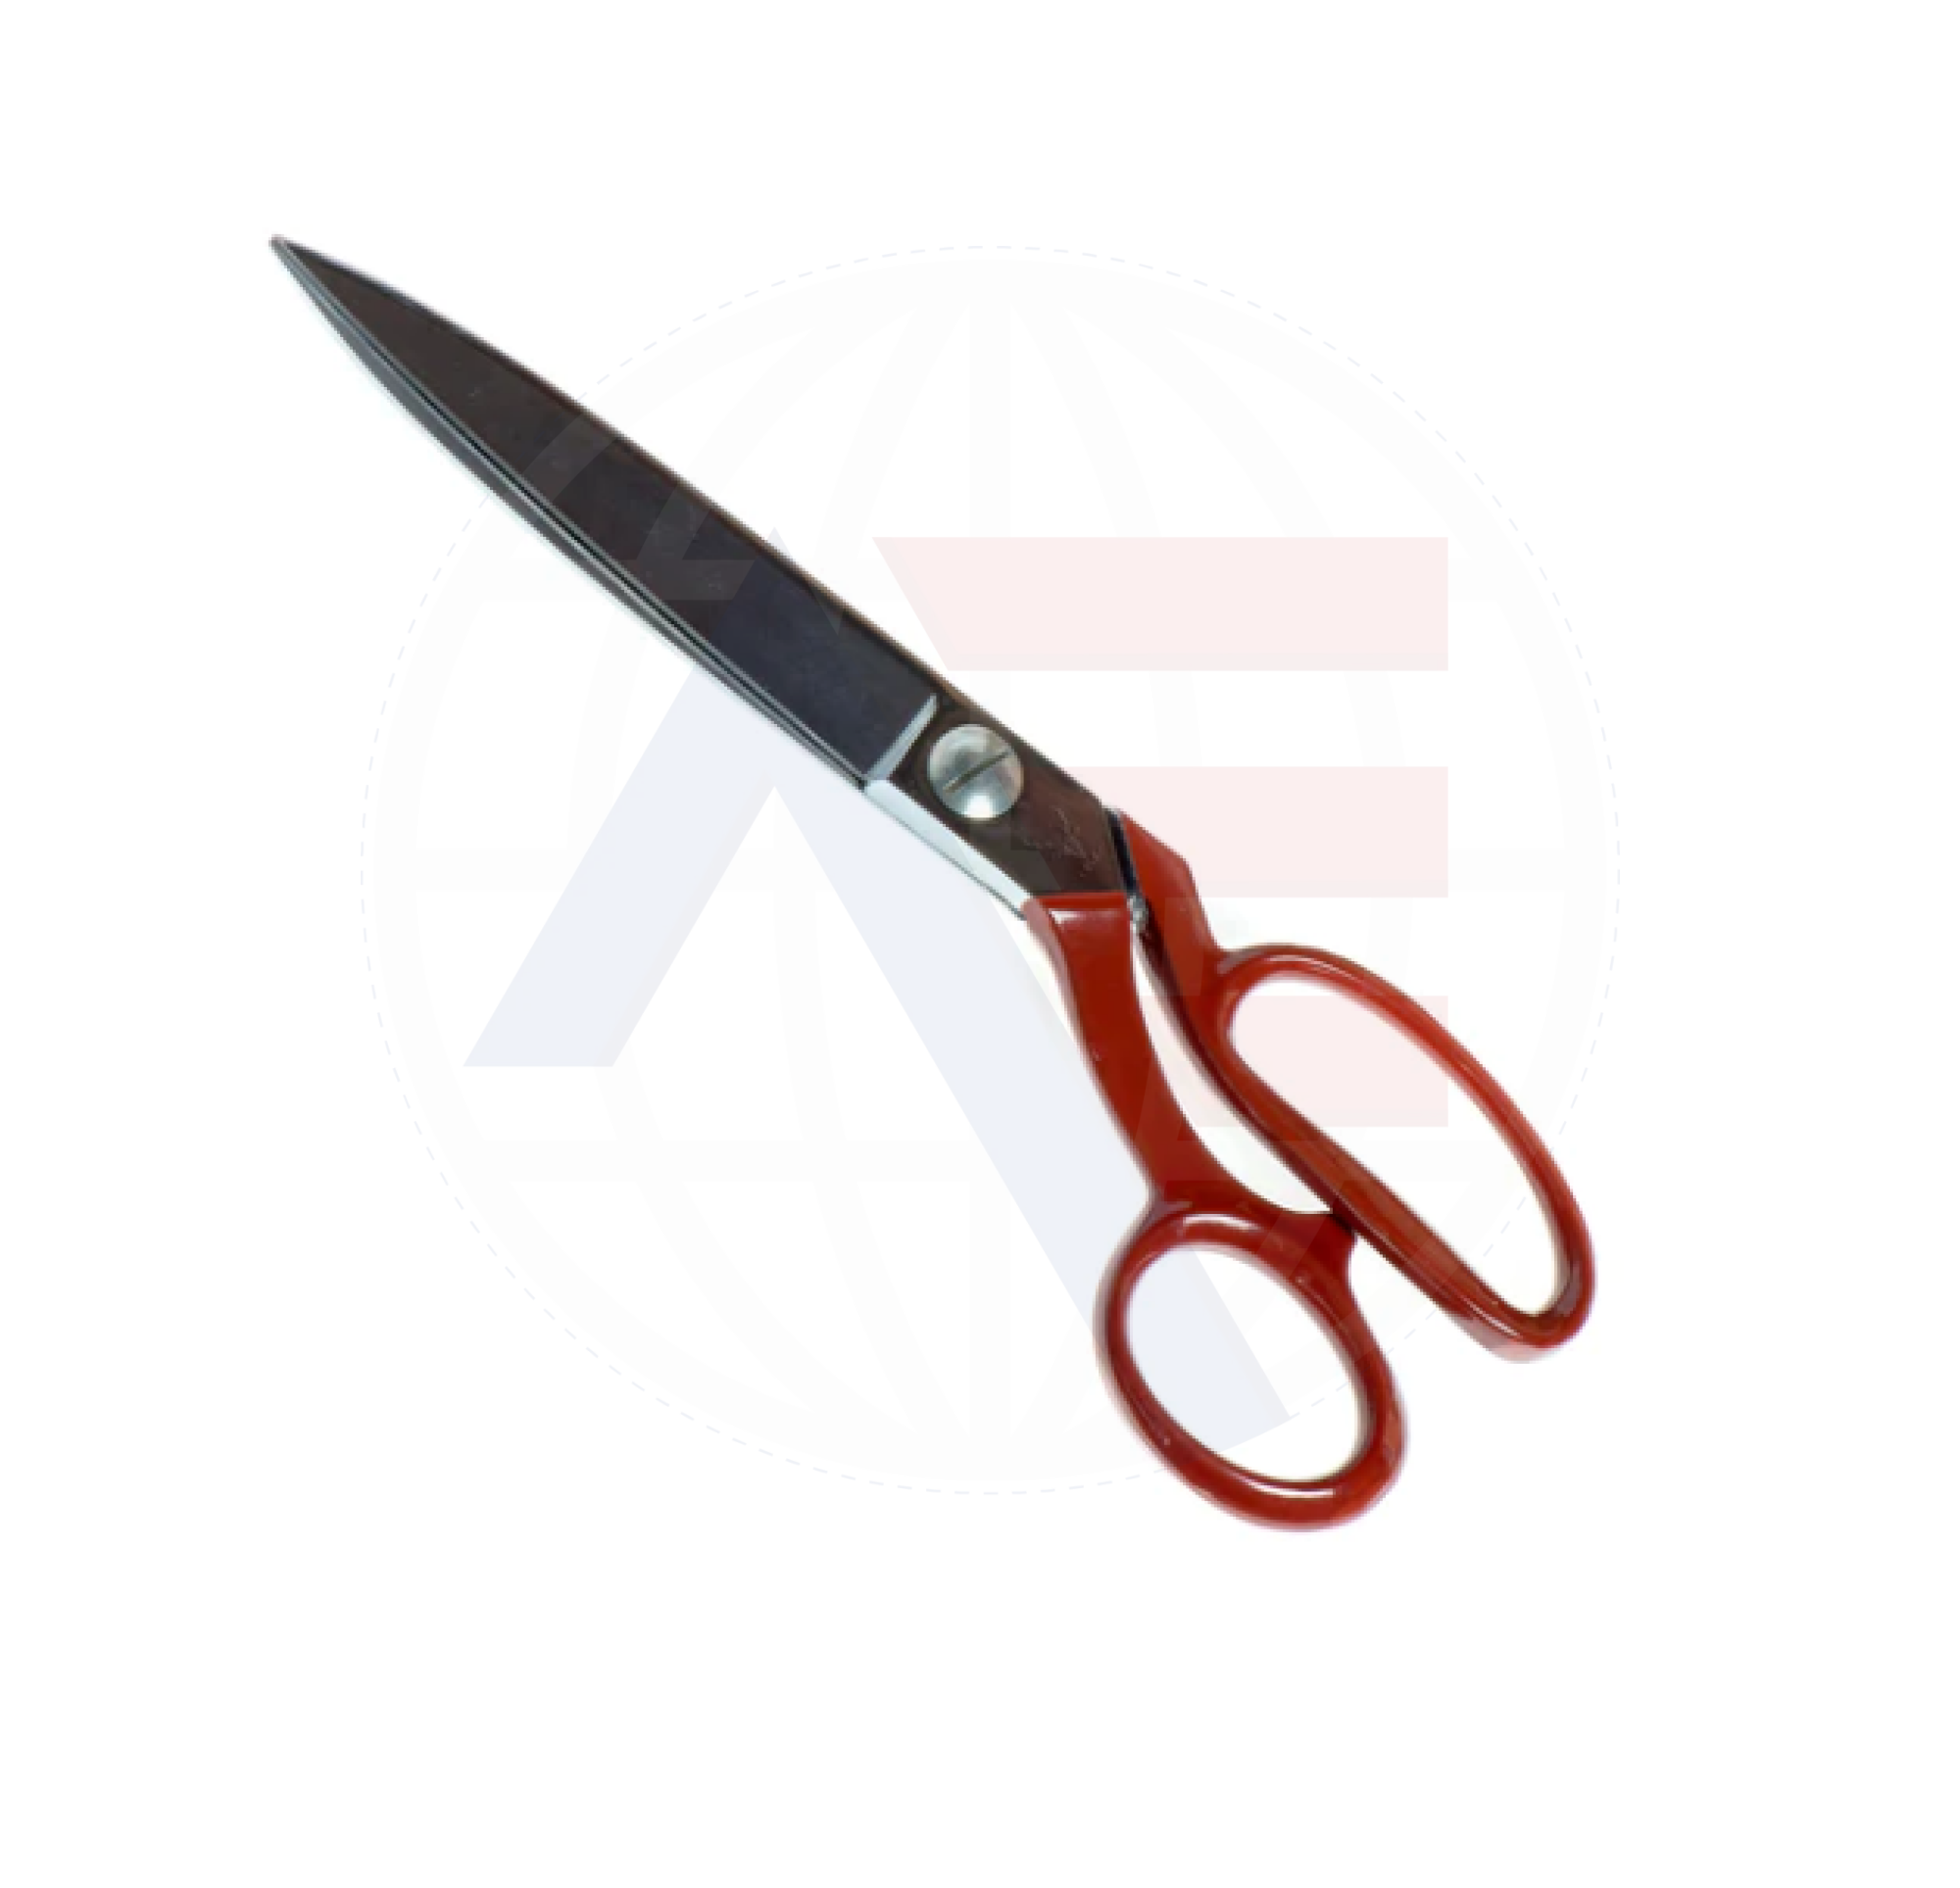 Elk 10 Left Handed Tailors Shears With Lower Serrated Blades